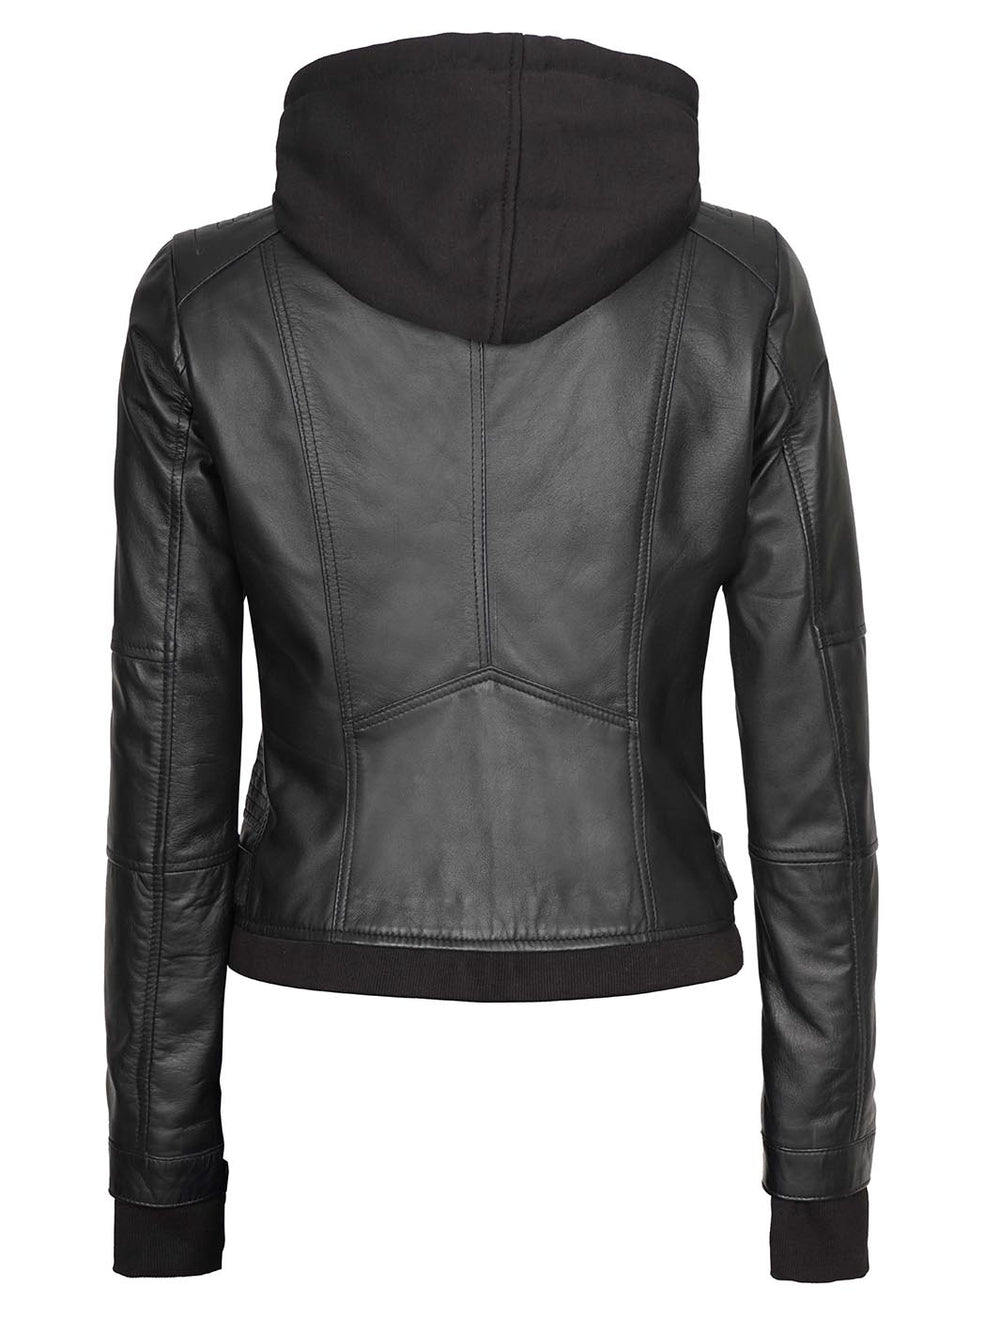 Womens Black Leather Jacket with hood